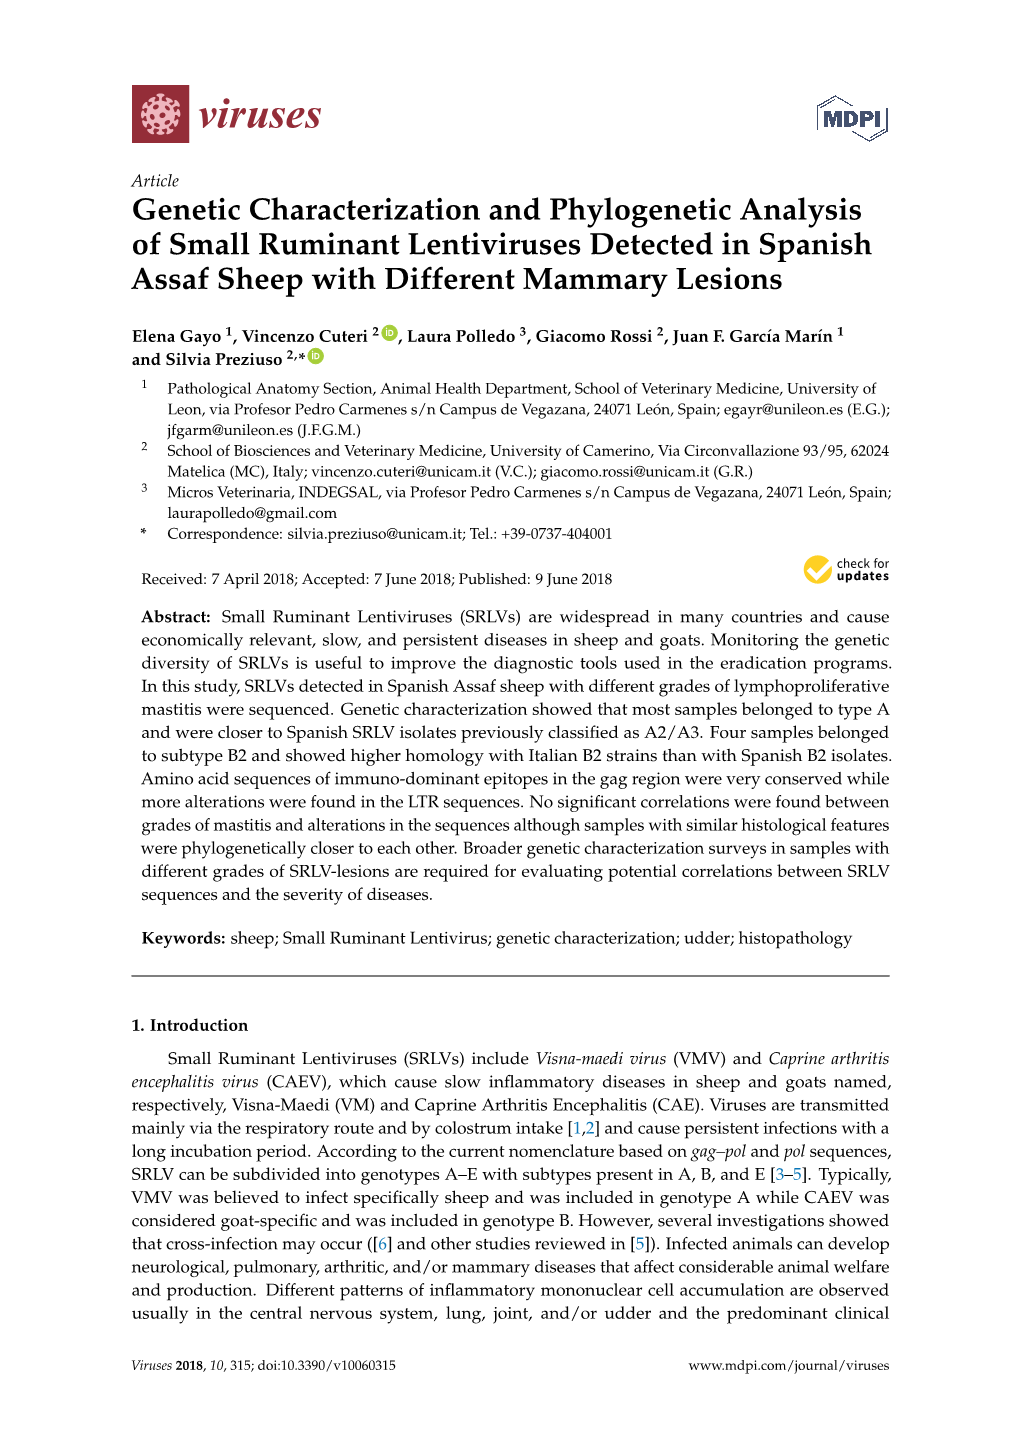 Genetic Characterization and Phylogenetic Analysis of Small Ruminant Lentiviruses Detected in Spanish Assaf Sheep with Different Mammary Lesions